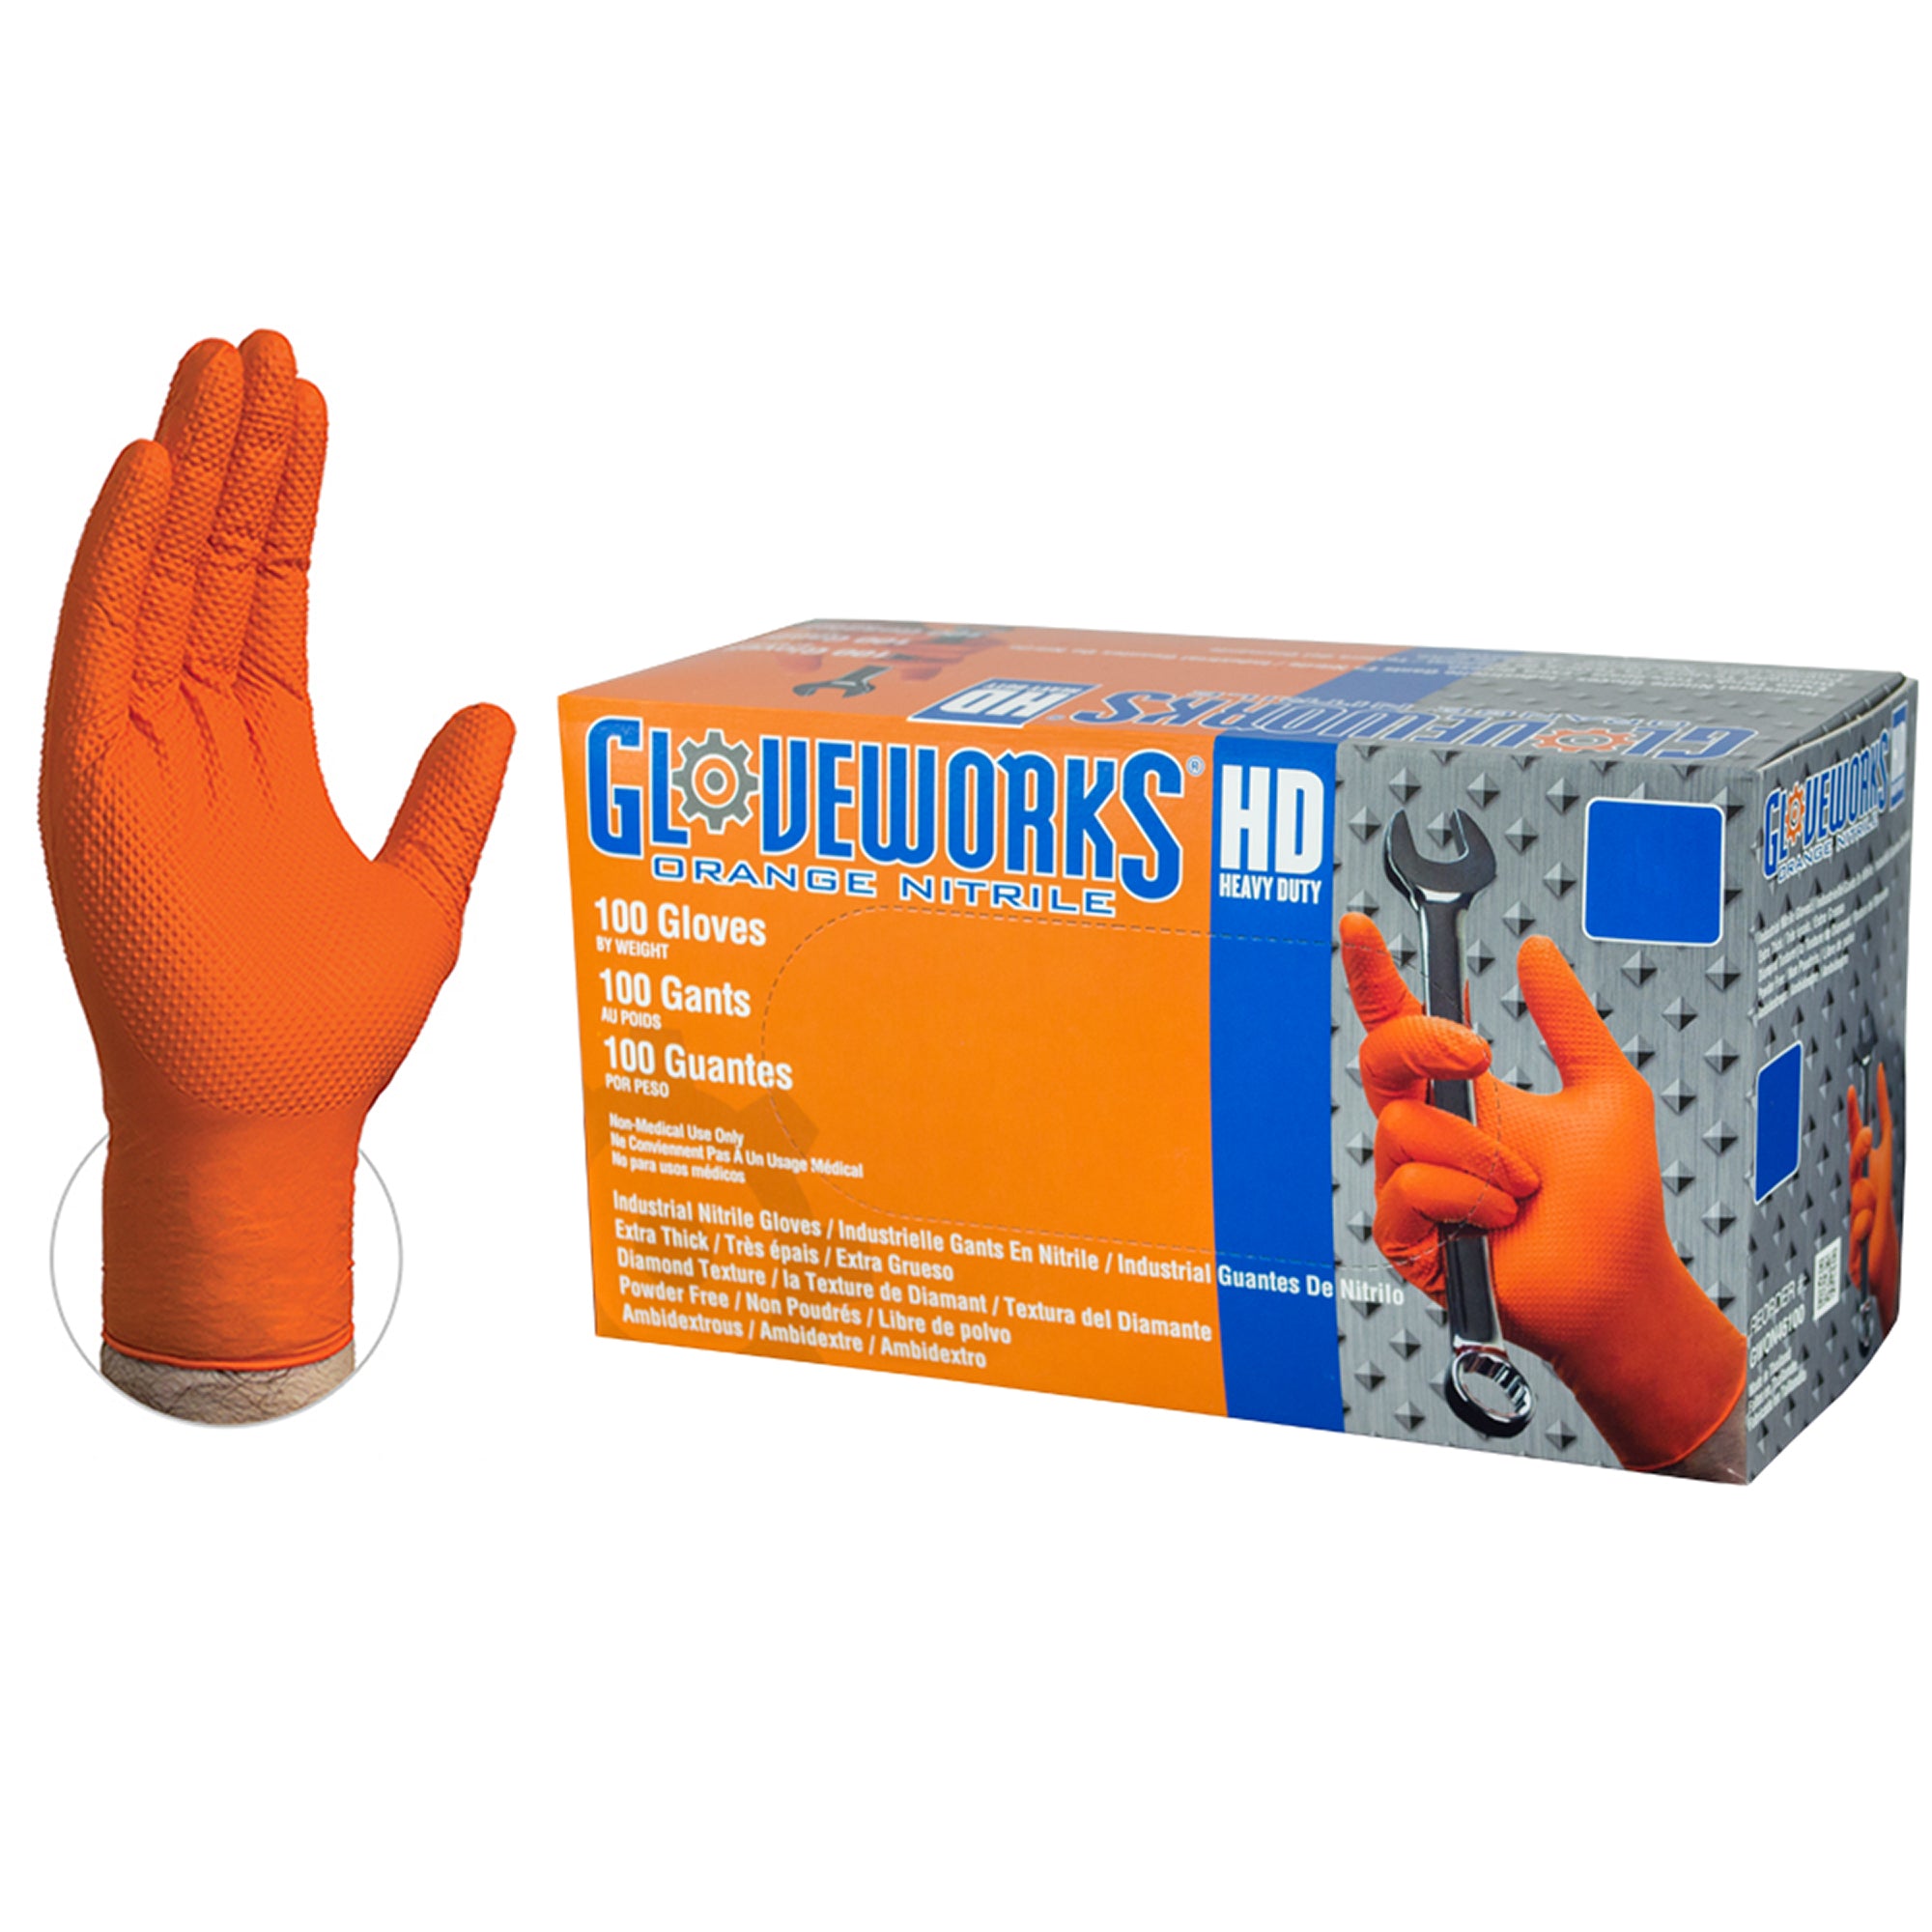 Gloveworks HD Orange Nitrile Industrial Disposable Gloves, 8 mil, Latex-Free, Raised Diamond Texture, Small, 2 Boxes of 100